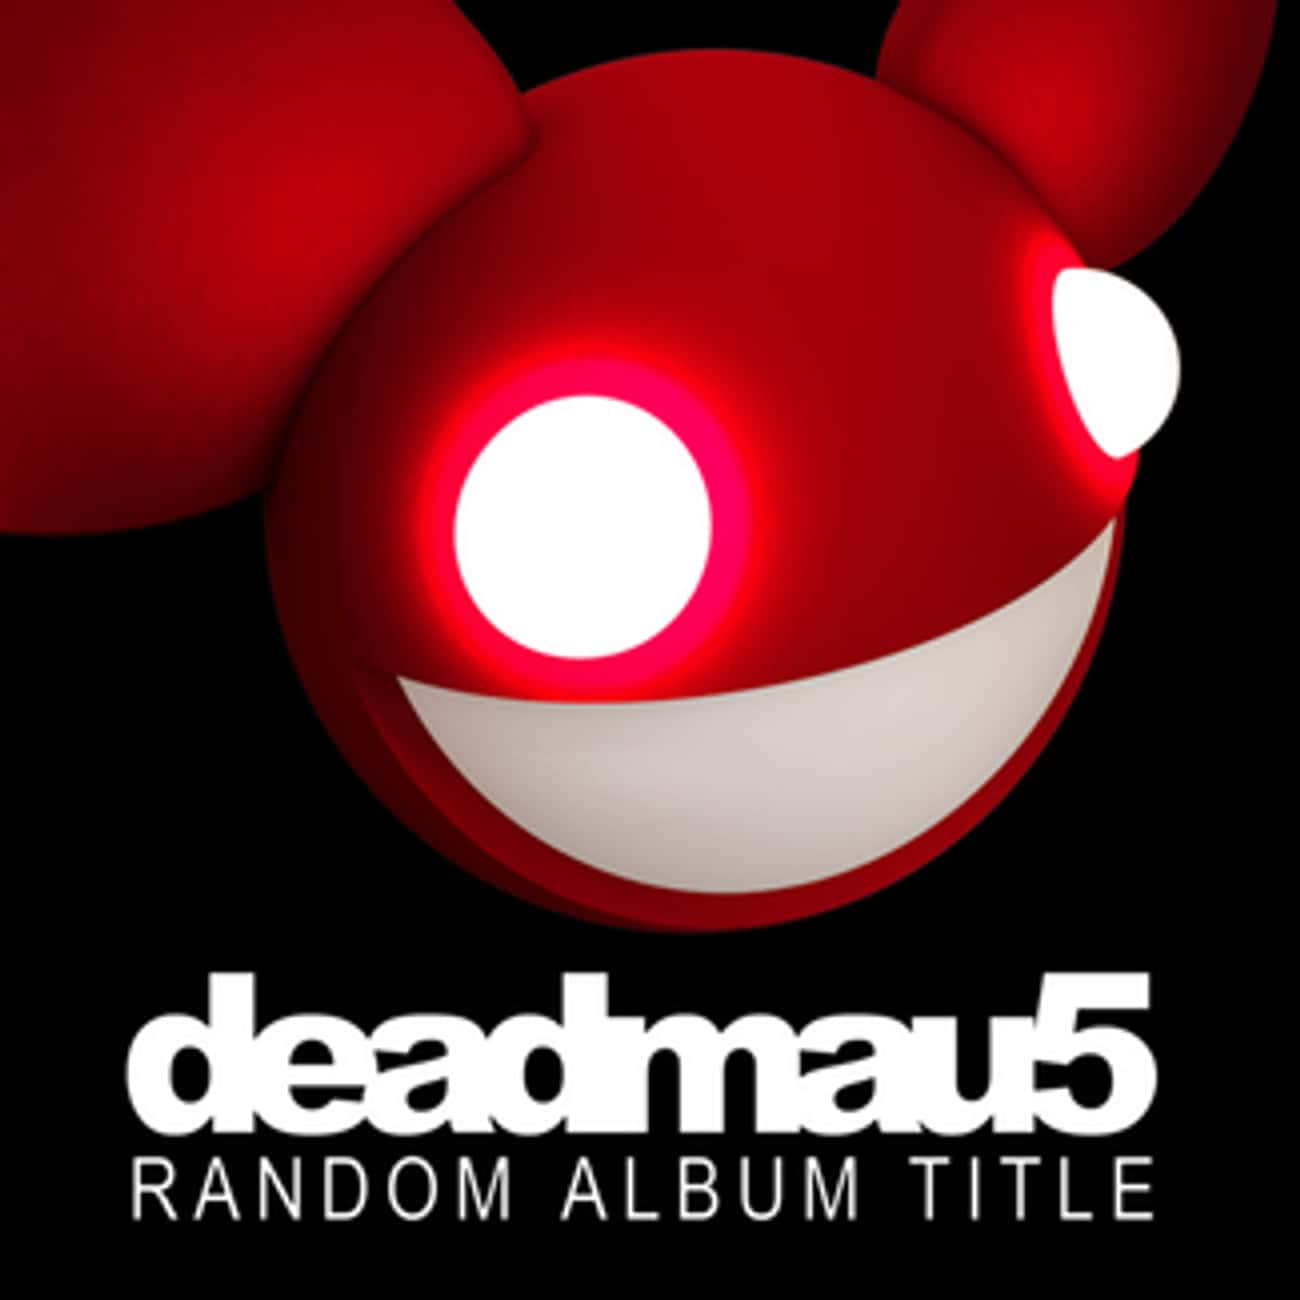 The Best Deadmau5 Albums Ranked By Fans